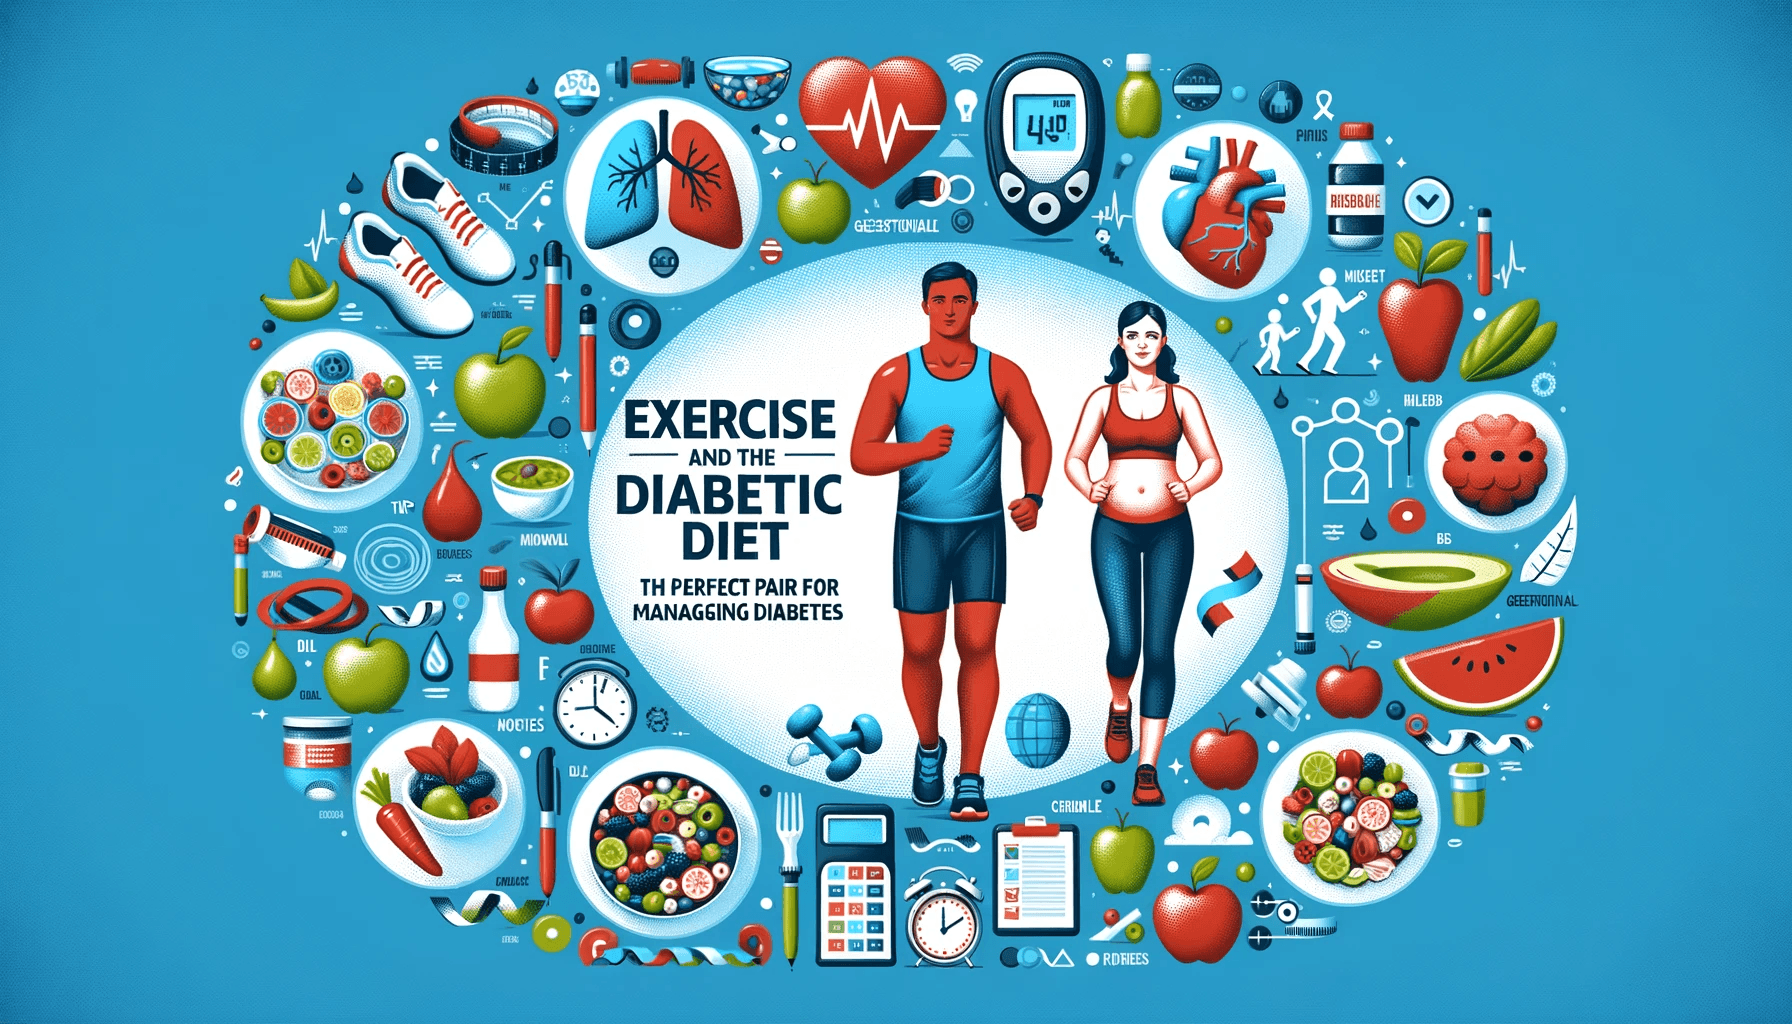 Exercise and the Diabetic Diet